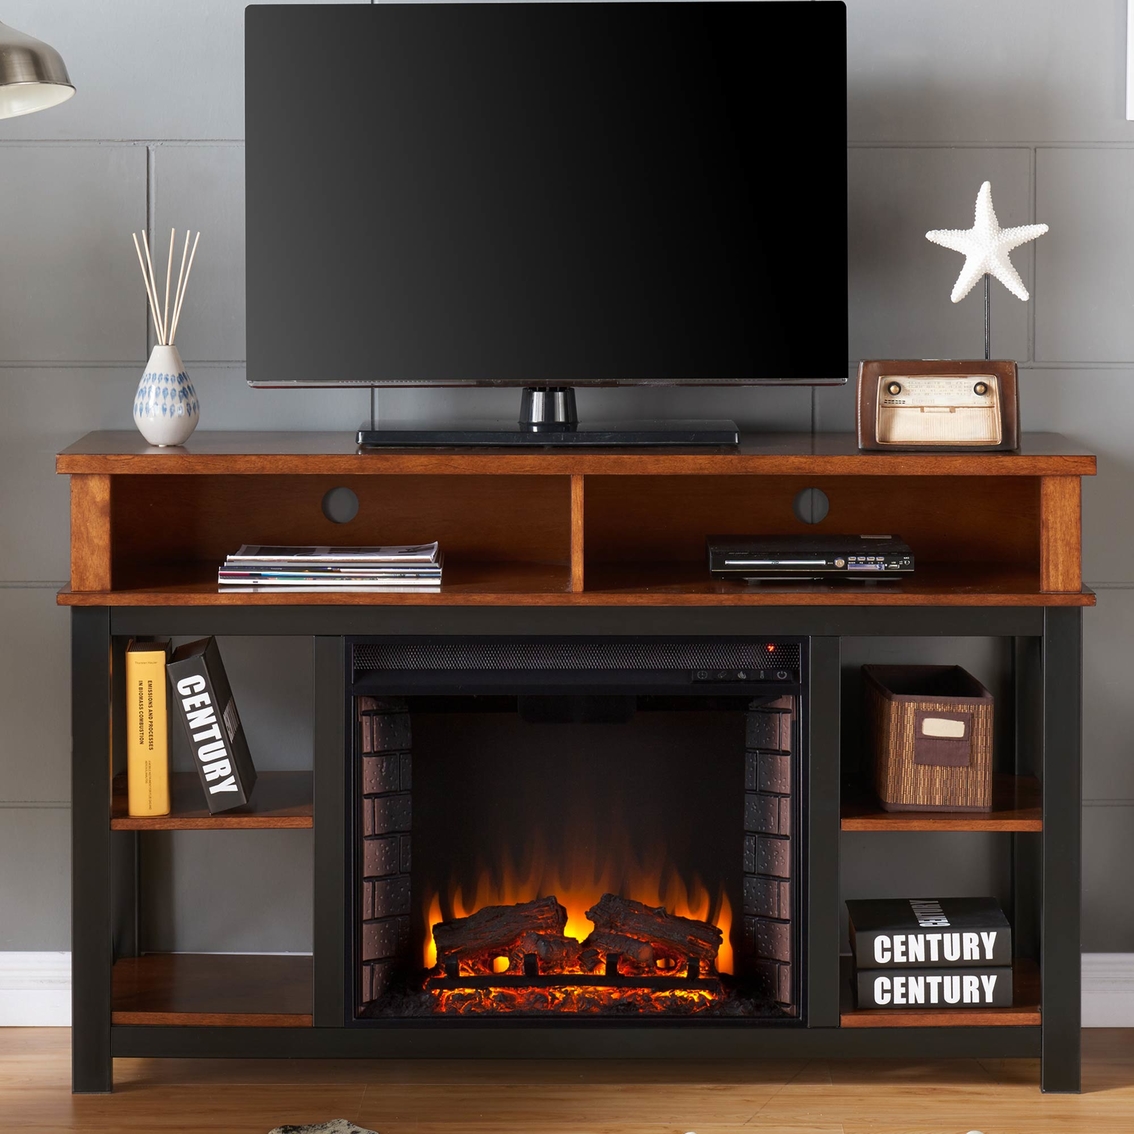 Electric Fireplace With Bookshelves On Each Side Fireplace World